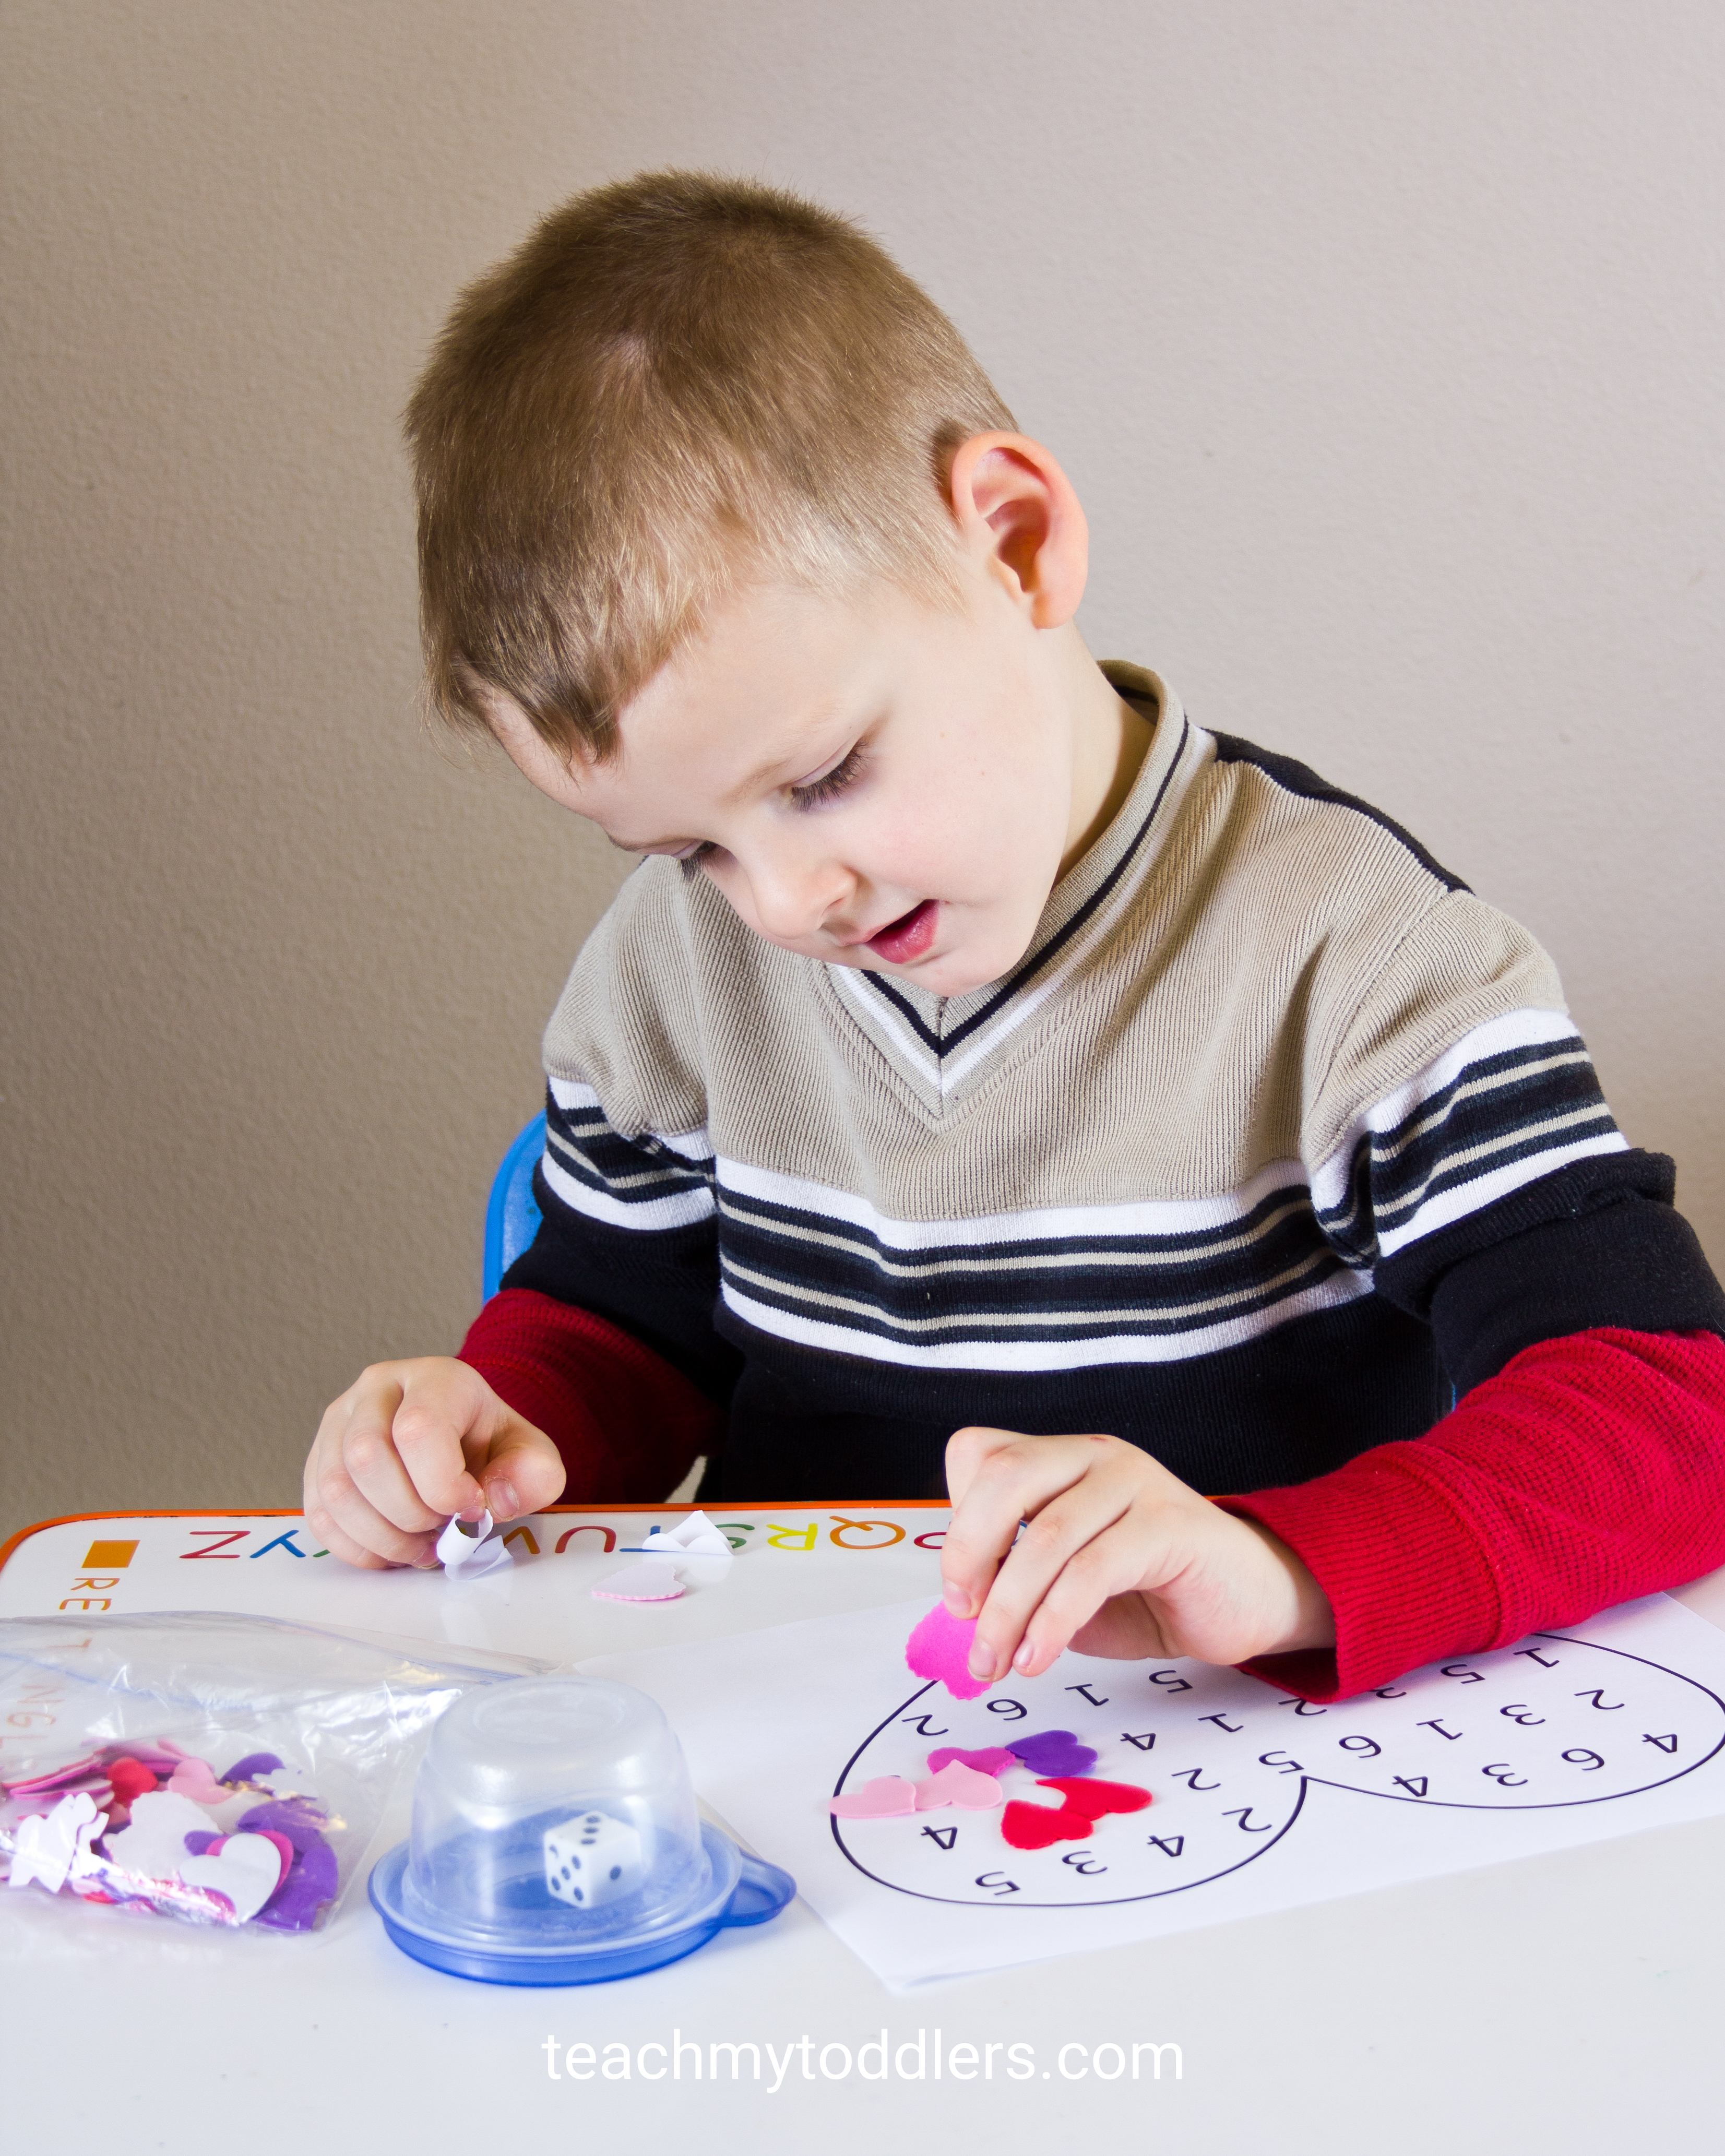 Find out how to use these fun counting activities to teach toddlers numbers